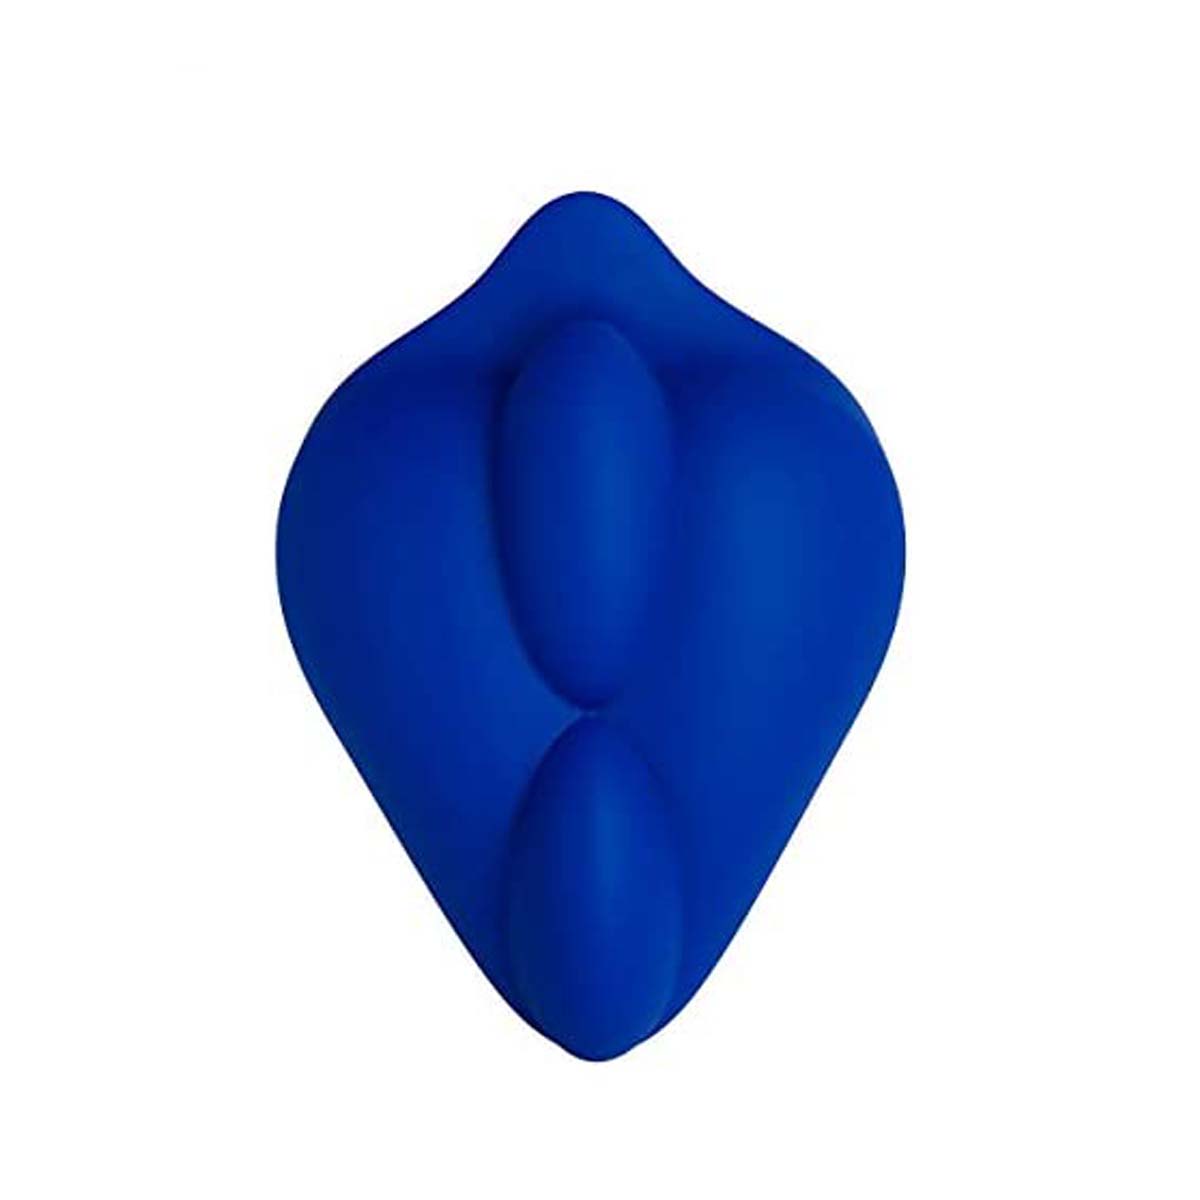 Navy blue silicone stimulation cushion for dildo Nudie Co